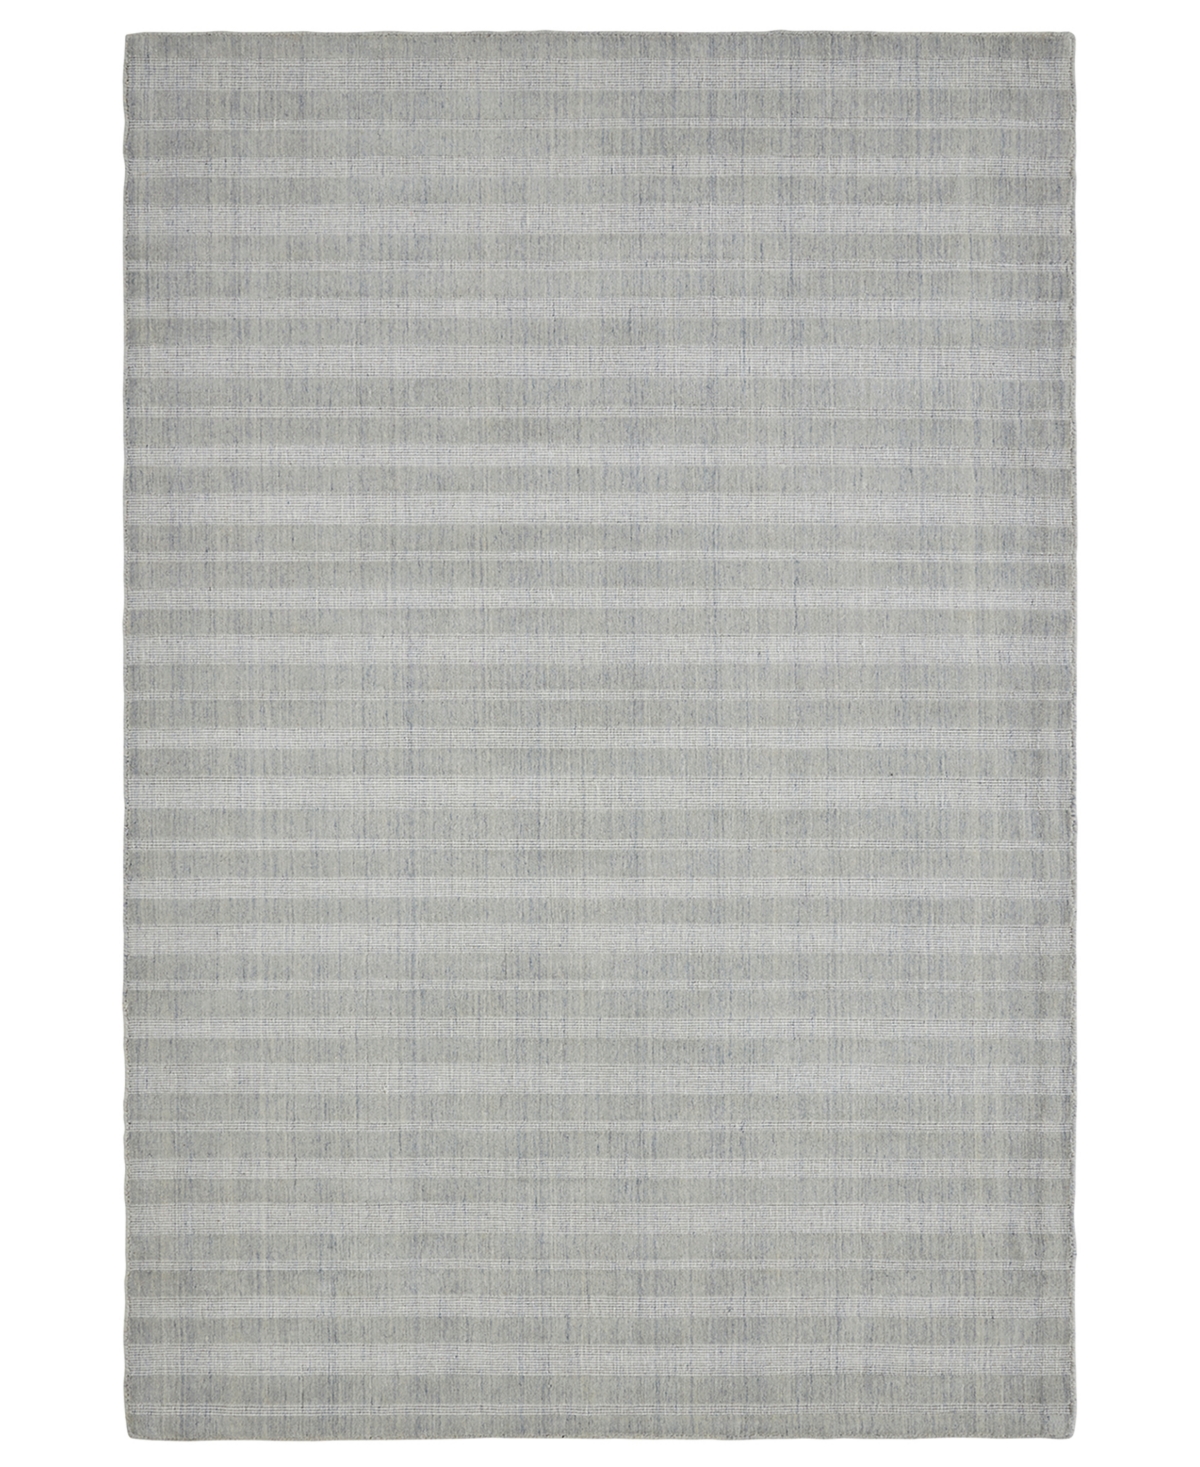 Stanton Rug Company Aubree Stripe As100 8' X 10' Area Rug In Blue